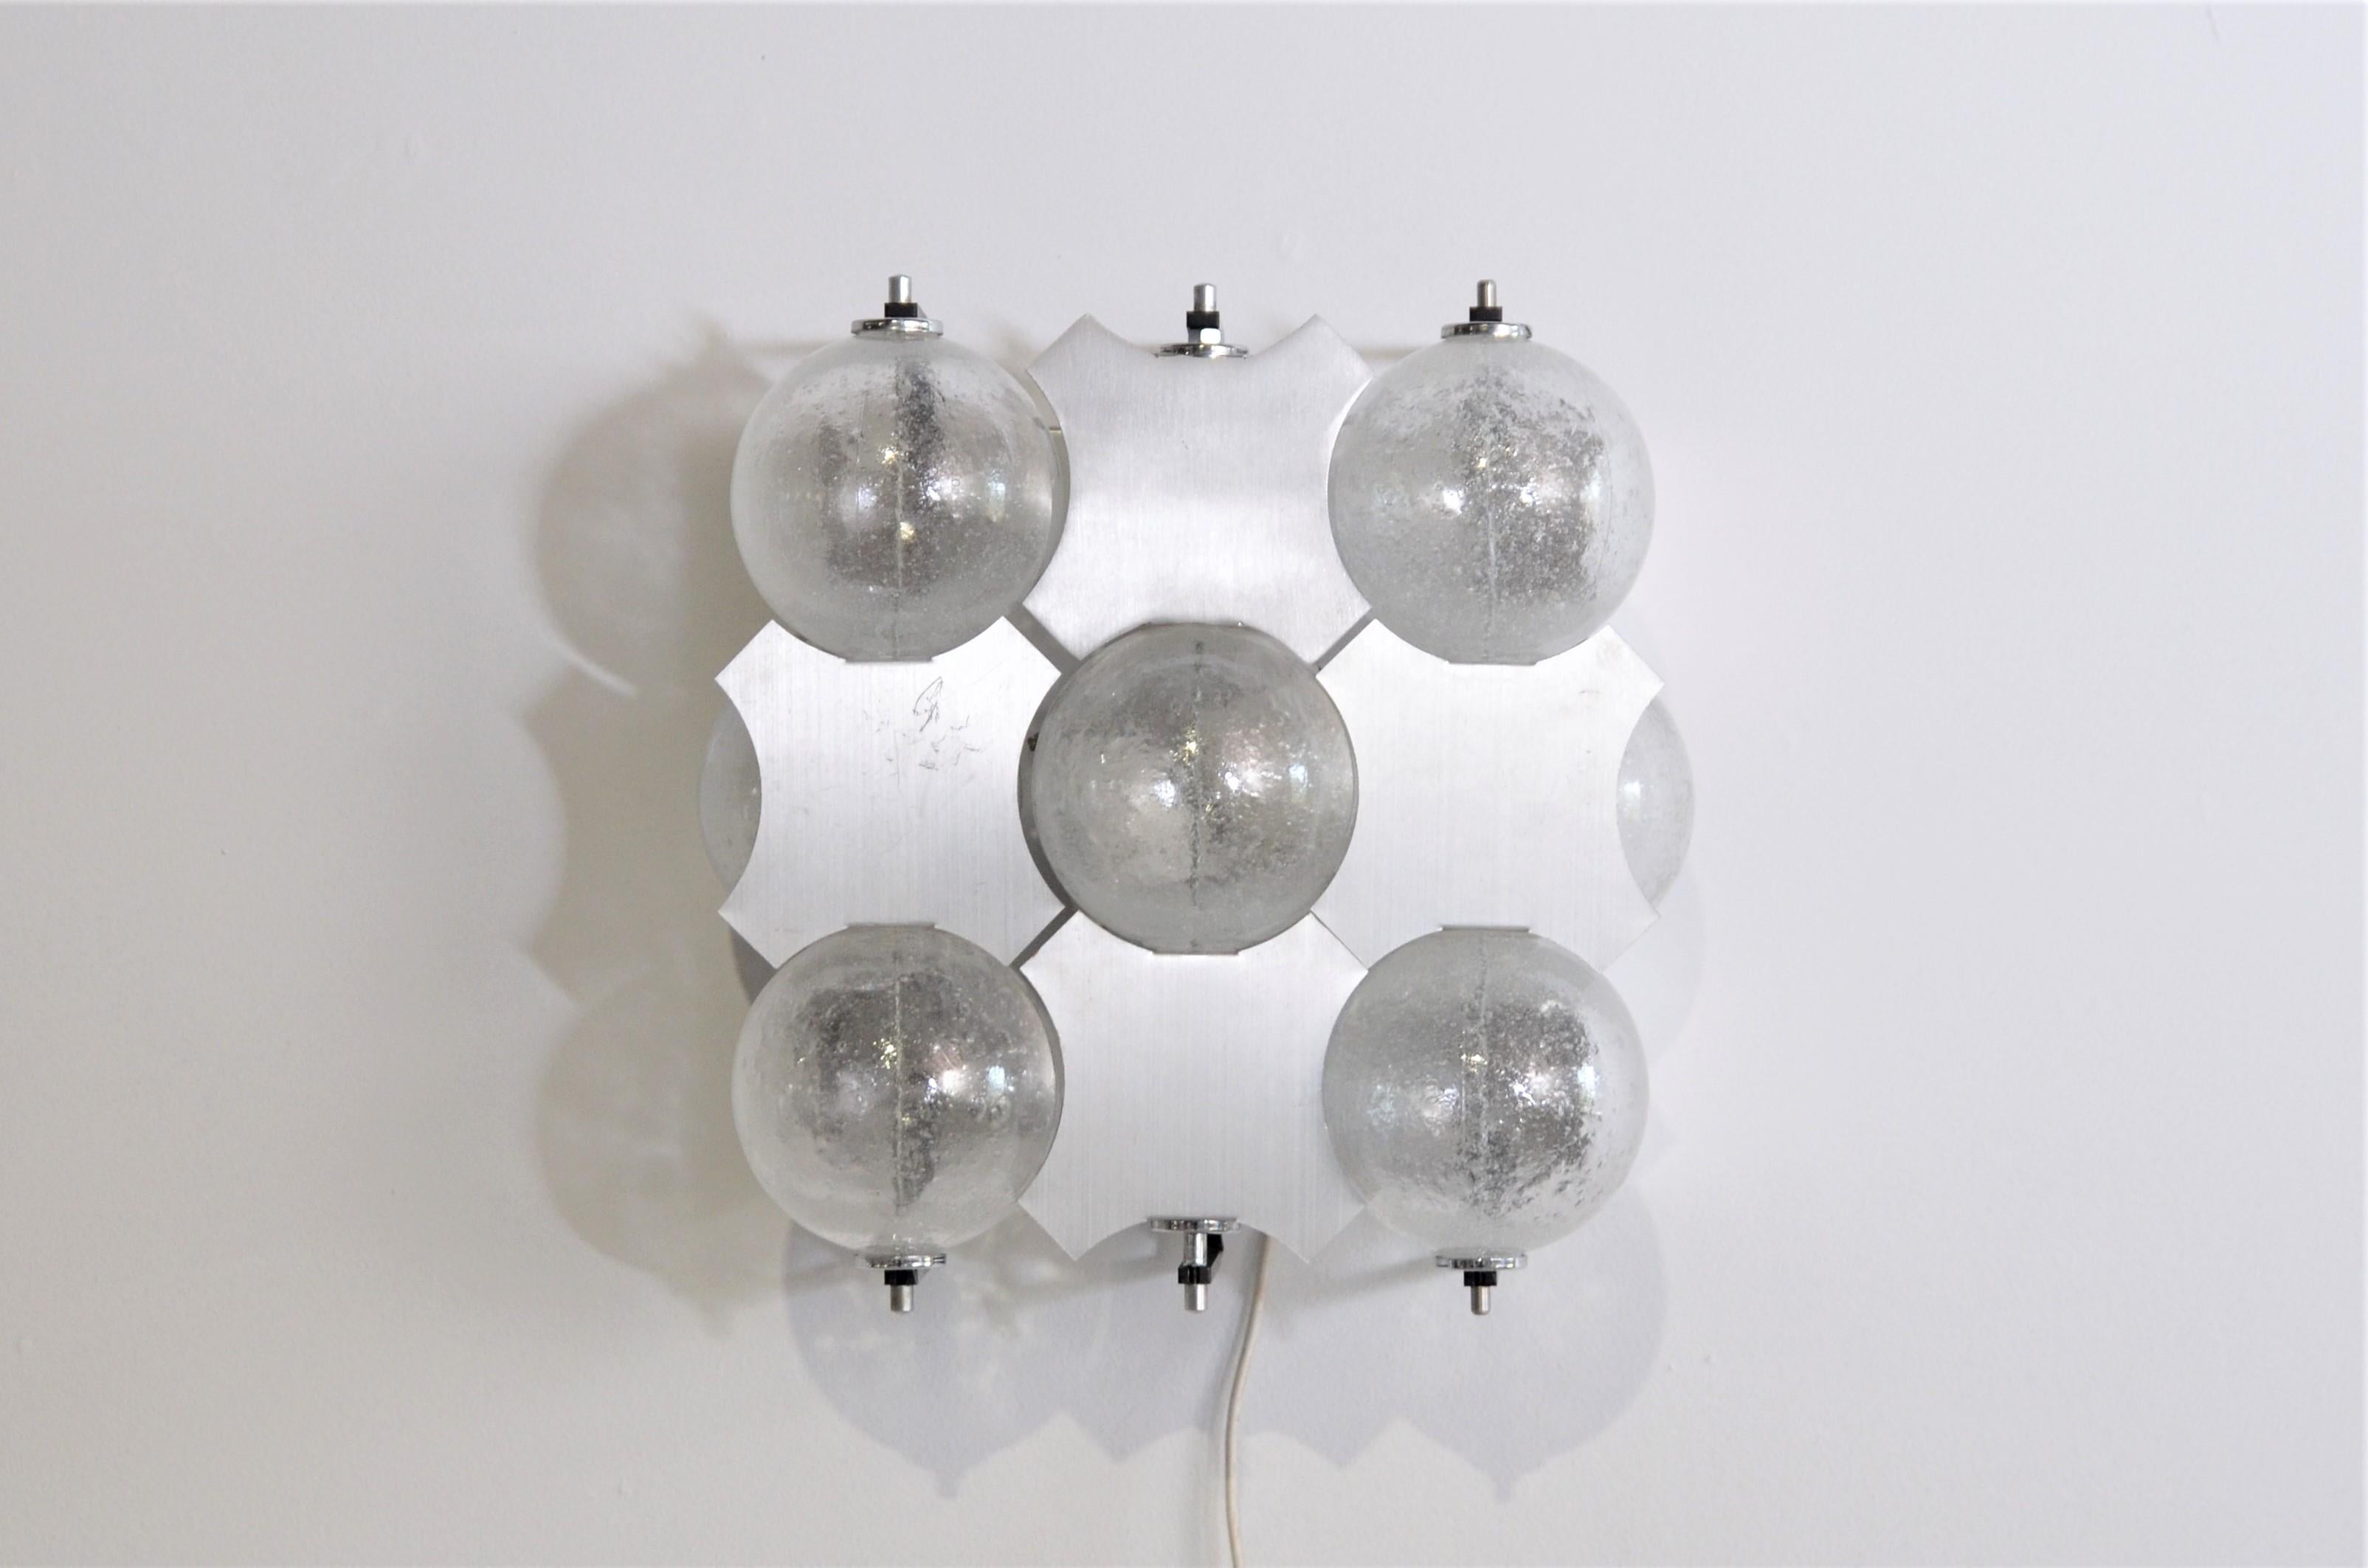 Wall lamp model C1645 by RAAK, Amsterdam with five large glass spheres. The aluminum partitions between the balls are movable so the reflection of the light can be controlled somewhat. 
The lamp has two lamp holders for 60 watt E27 bulbs.